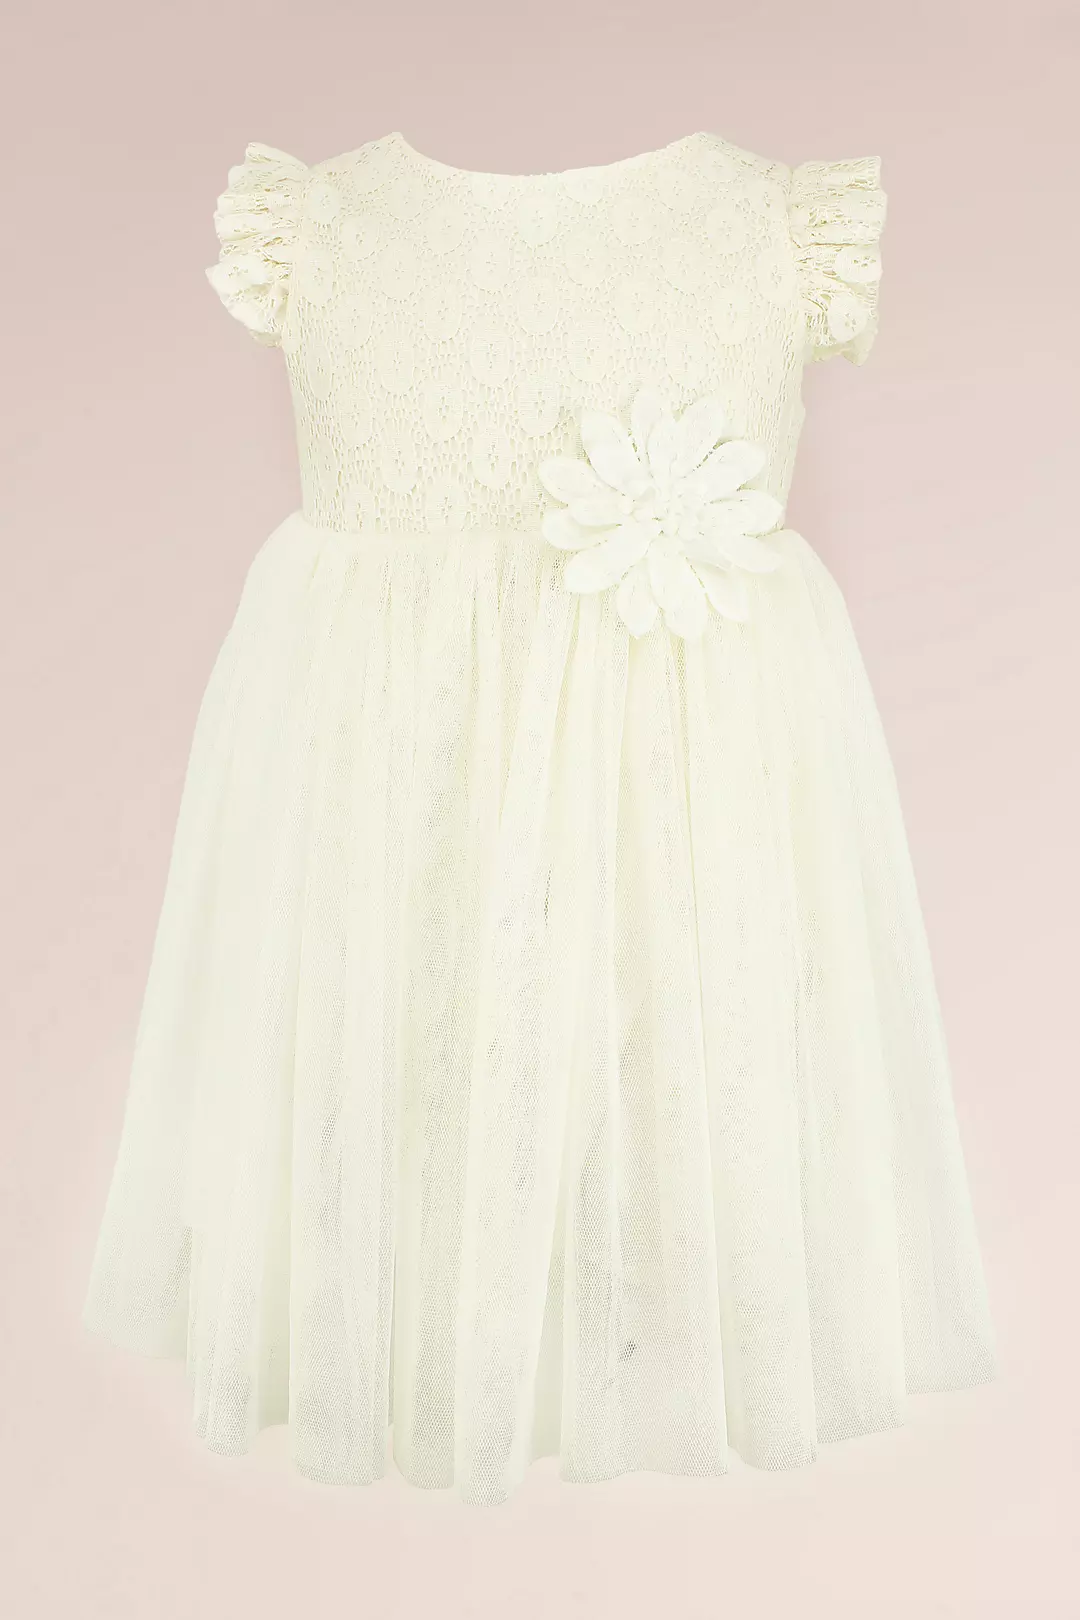 Lace Tulle Flower Girl Dress with Flutter Sleeves Image